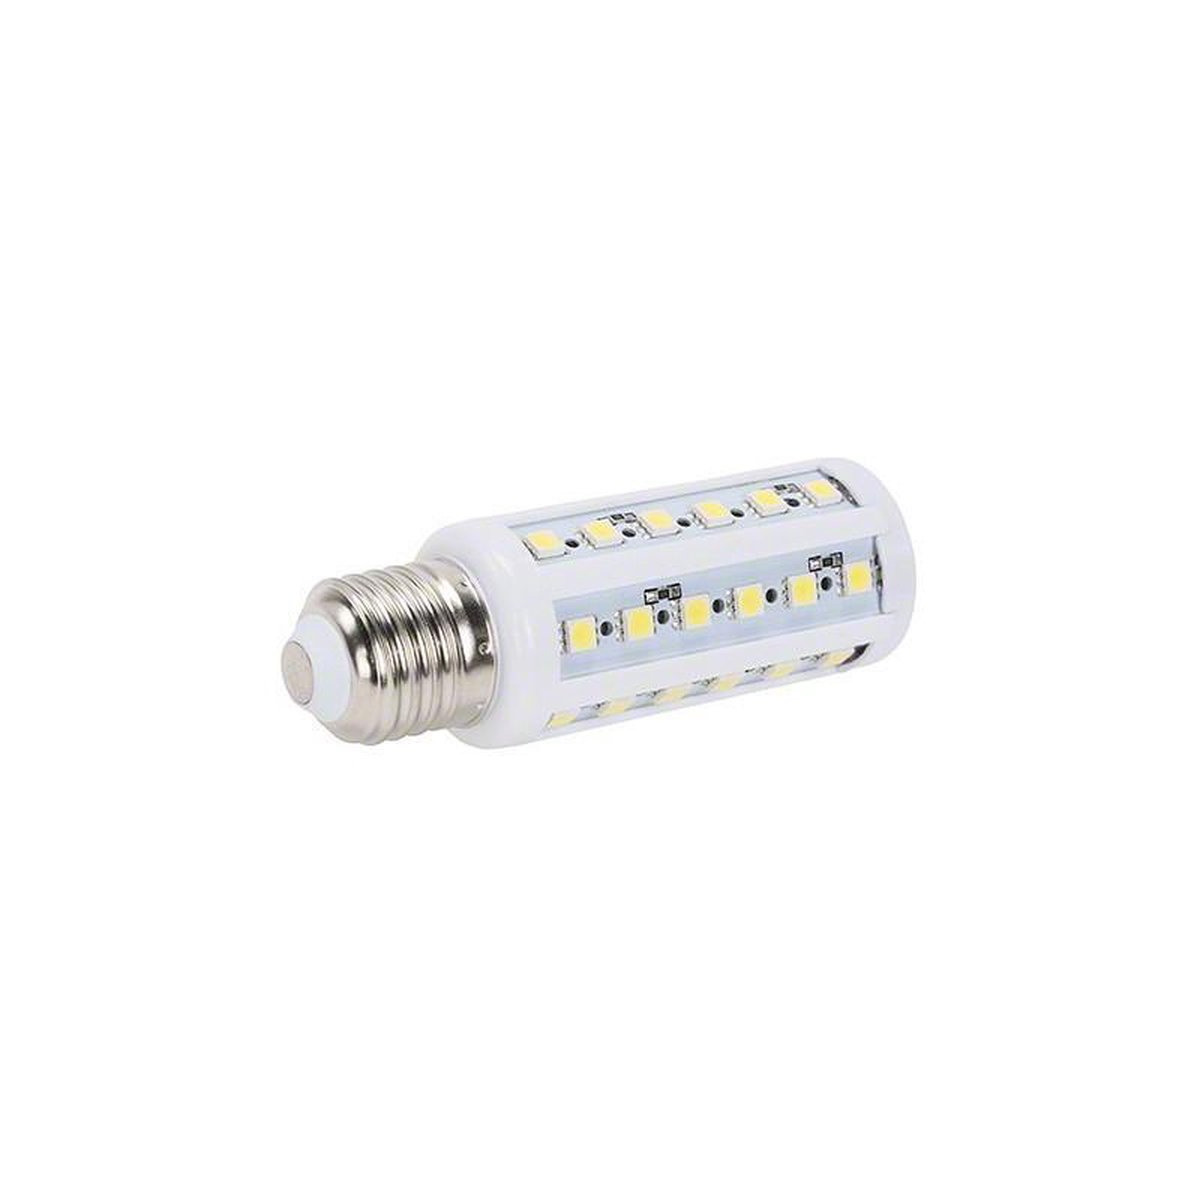 Orchard Rich man Cathedral LED Lamp E27 24V AC/DC 5050SMD 8W 640Lm | bol.com